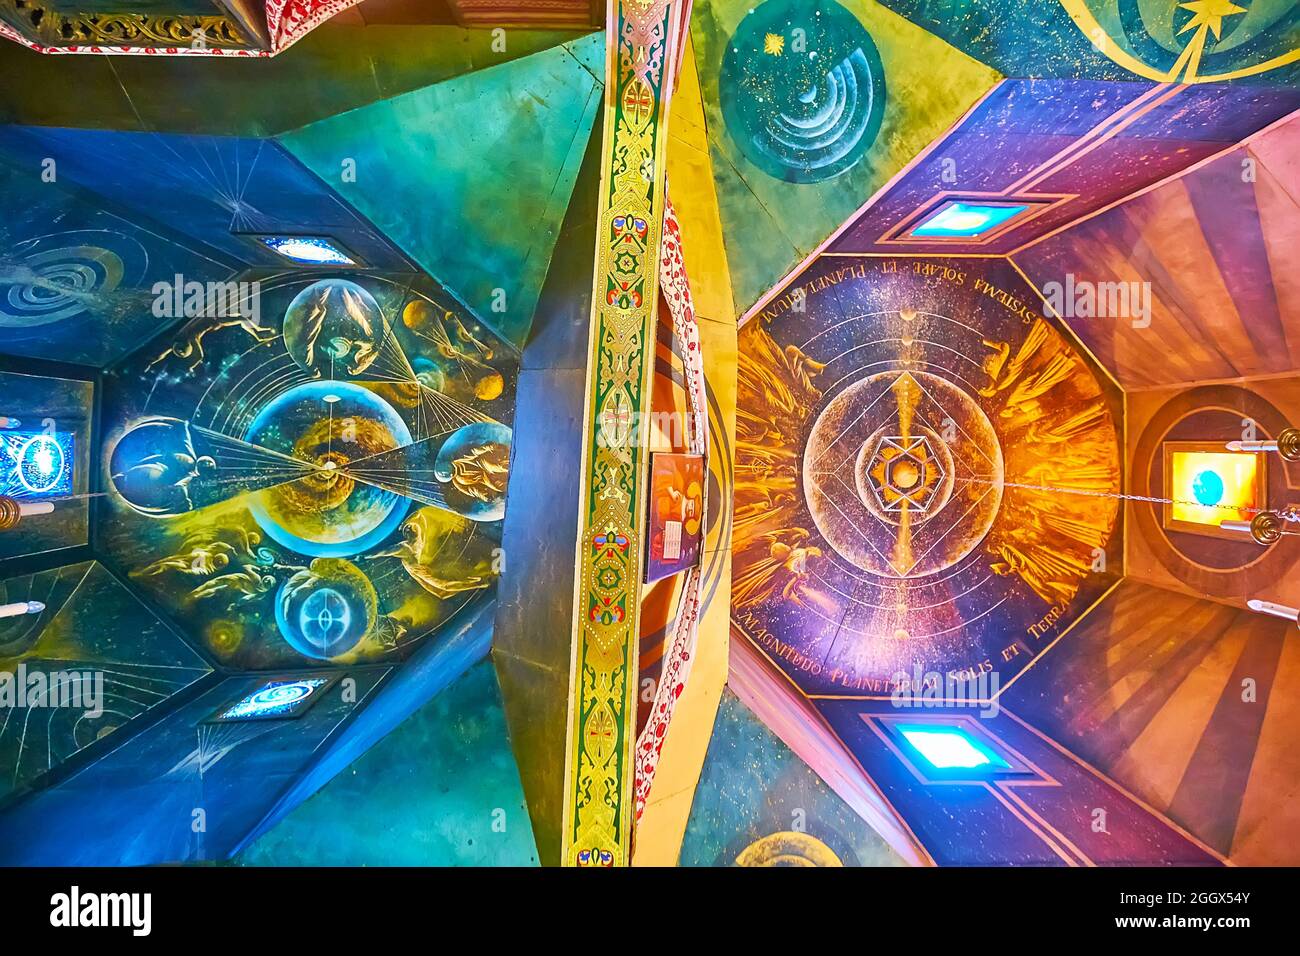 PEREIASLAV, UKRAINE - MAY 22, 2021: The inner domes of Museum of Ukrainian Orthodox Church History in Pereiaslav Scansen, decorated with space scenes, Stock Photo